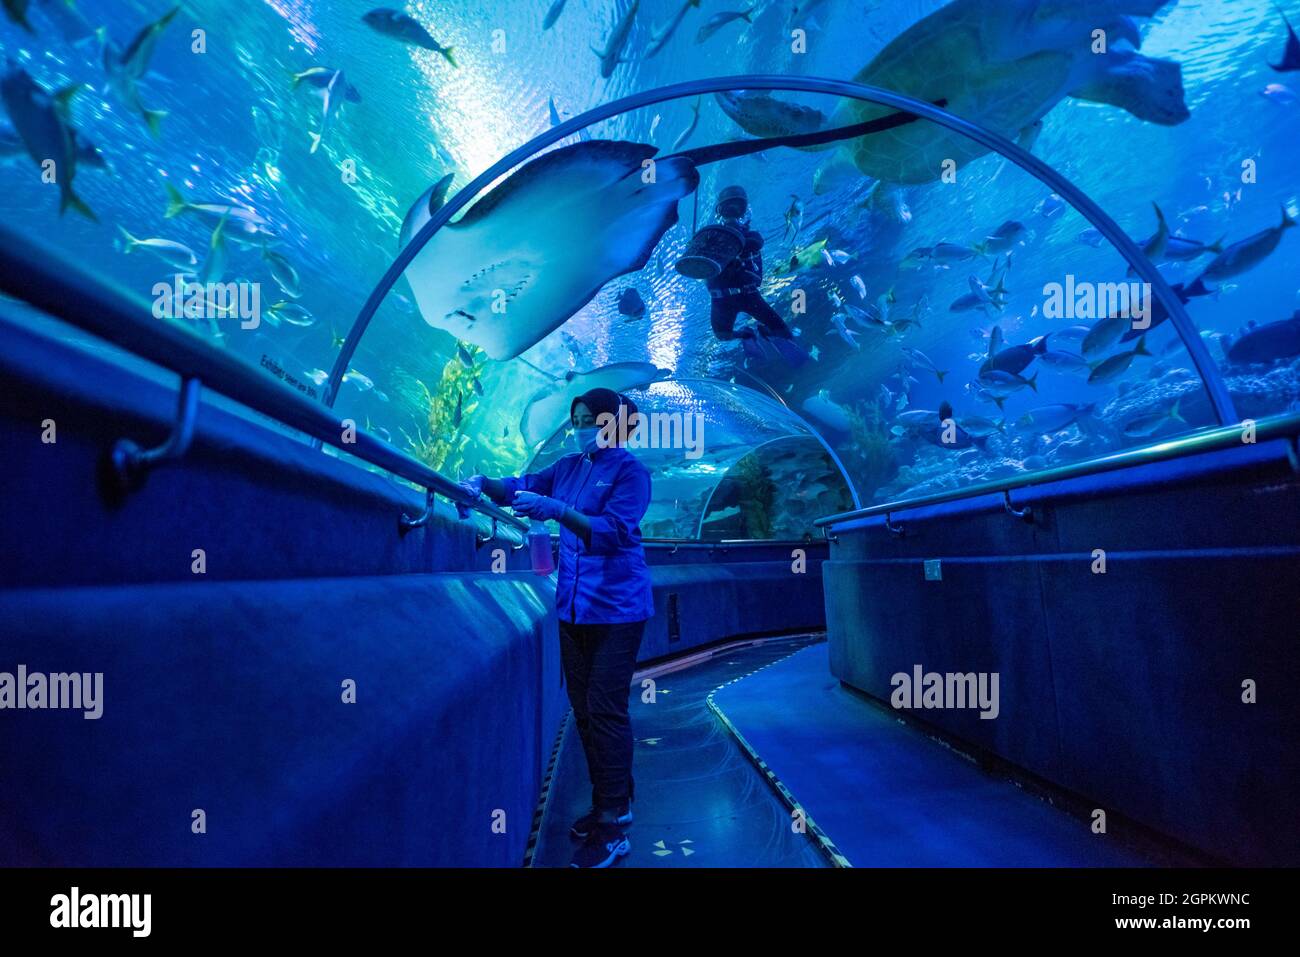 Kuala Lumpur, Malaysia. 29th Sep, 2021. A staff member prepares for the reopening at Aquaria KLCC in Kuala Lumpur, Malaysia, Sept. 29, 2021. Aquaria KLCC will be open for fully vaccinated visitors starting from Oct. 1. Credit: Chong Voon Chung/Xinhua/Alamy Live News Stock Photo